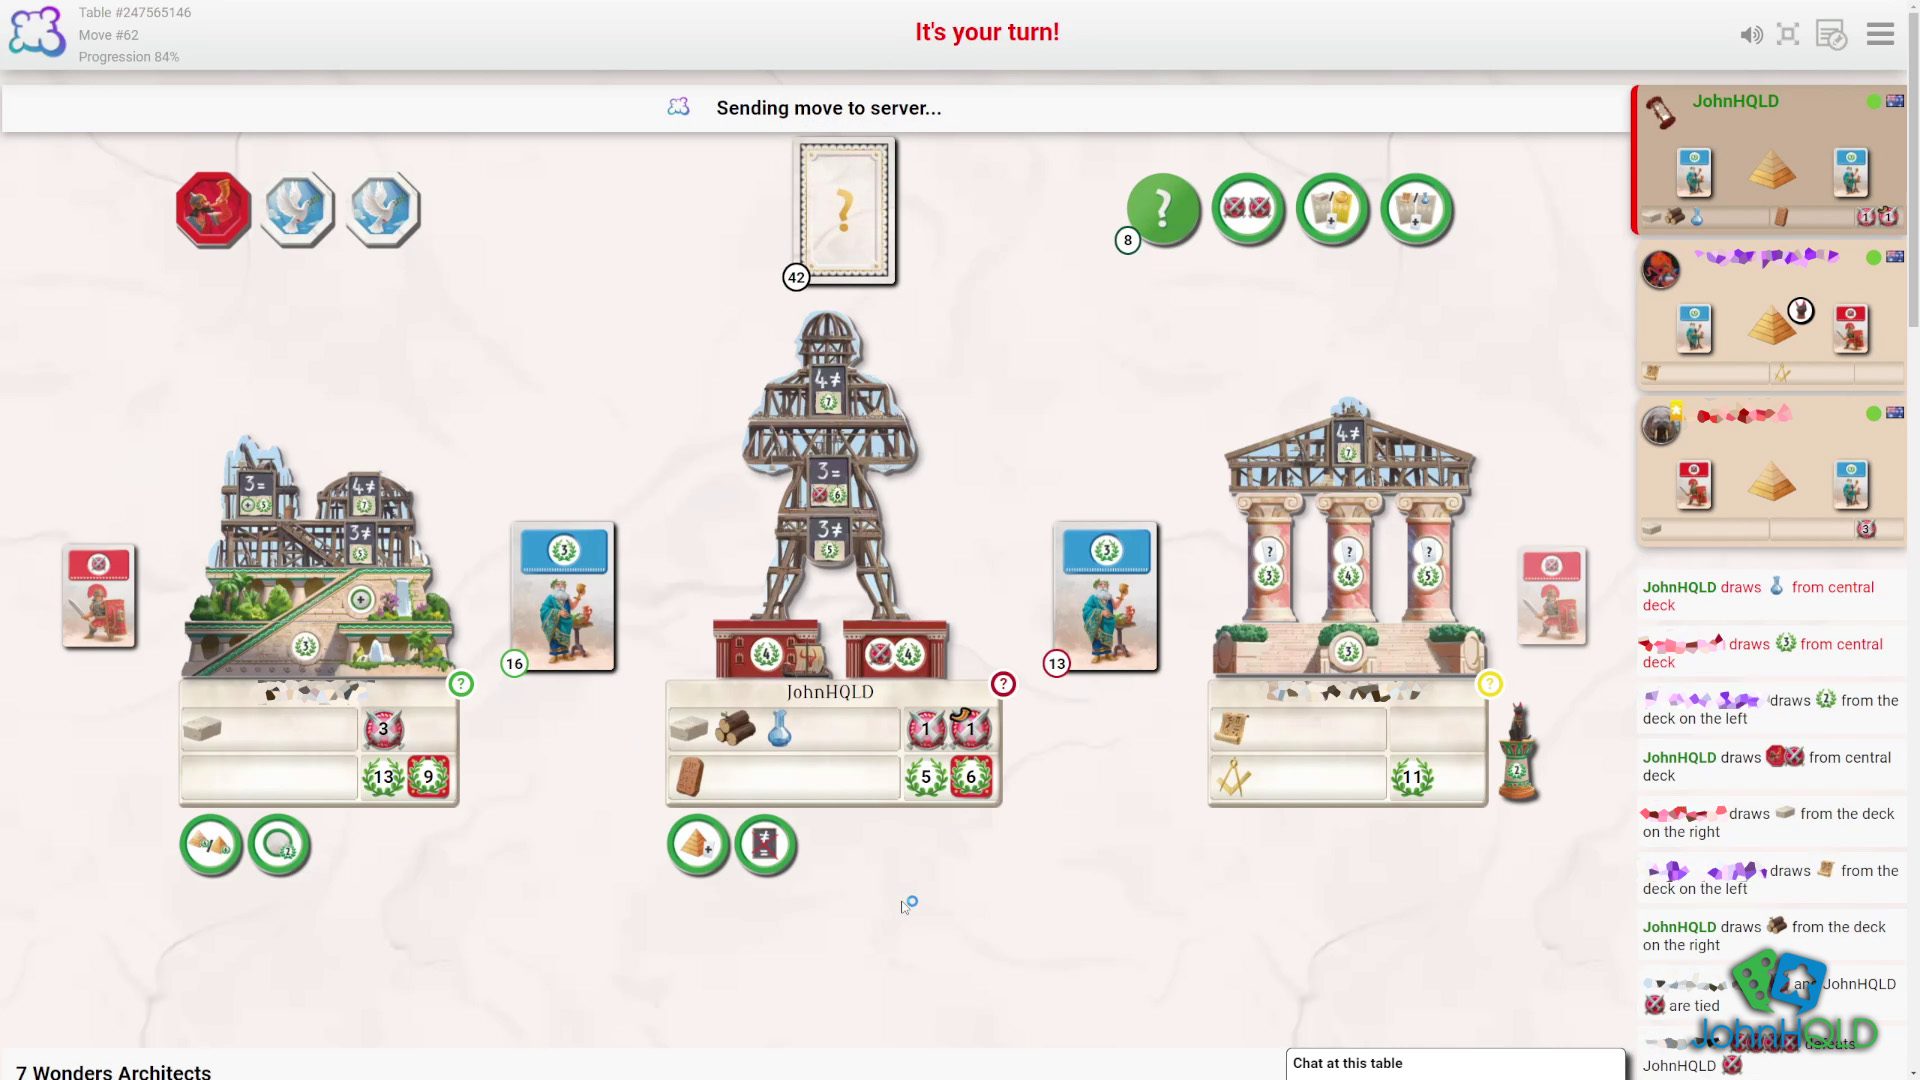 20220307 - 7 Wonders Architects - Having everything out makes gameplay simple to keep track of